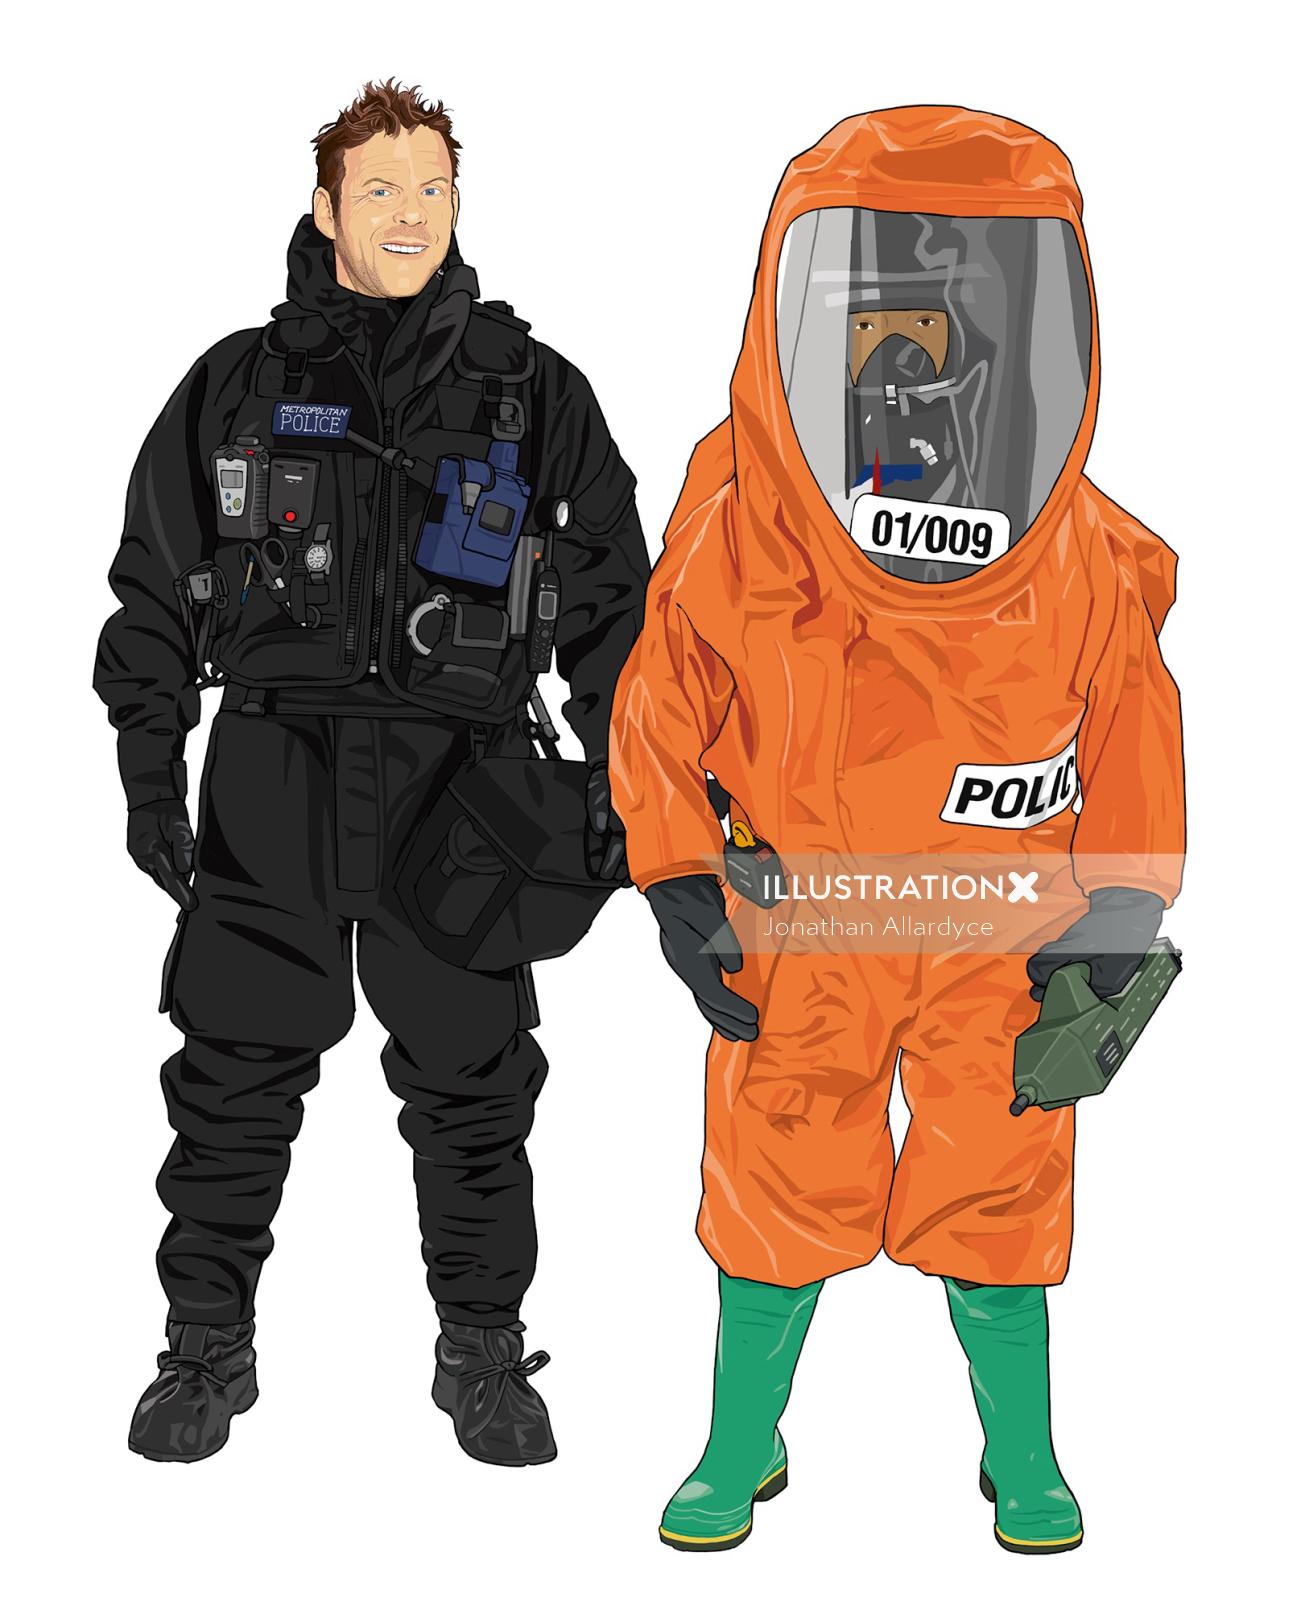 Costume showing Diving Officer and CBRN Officer